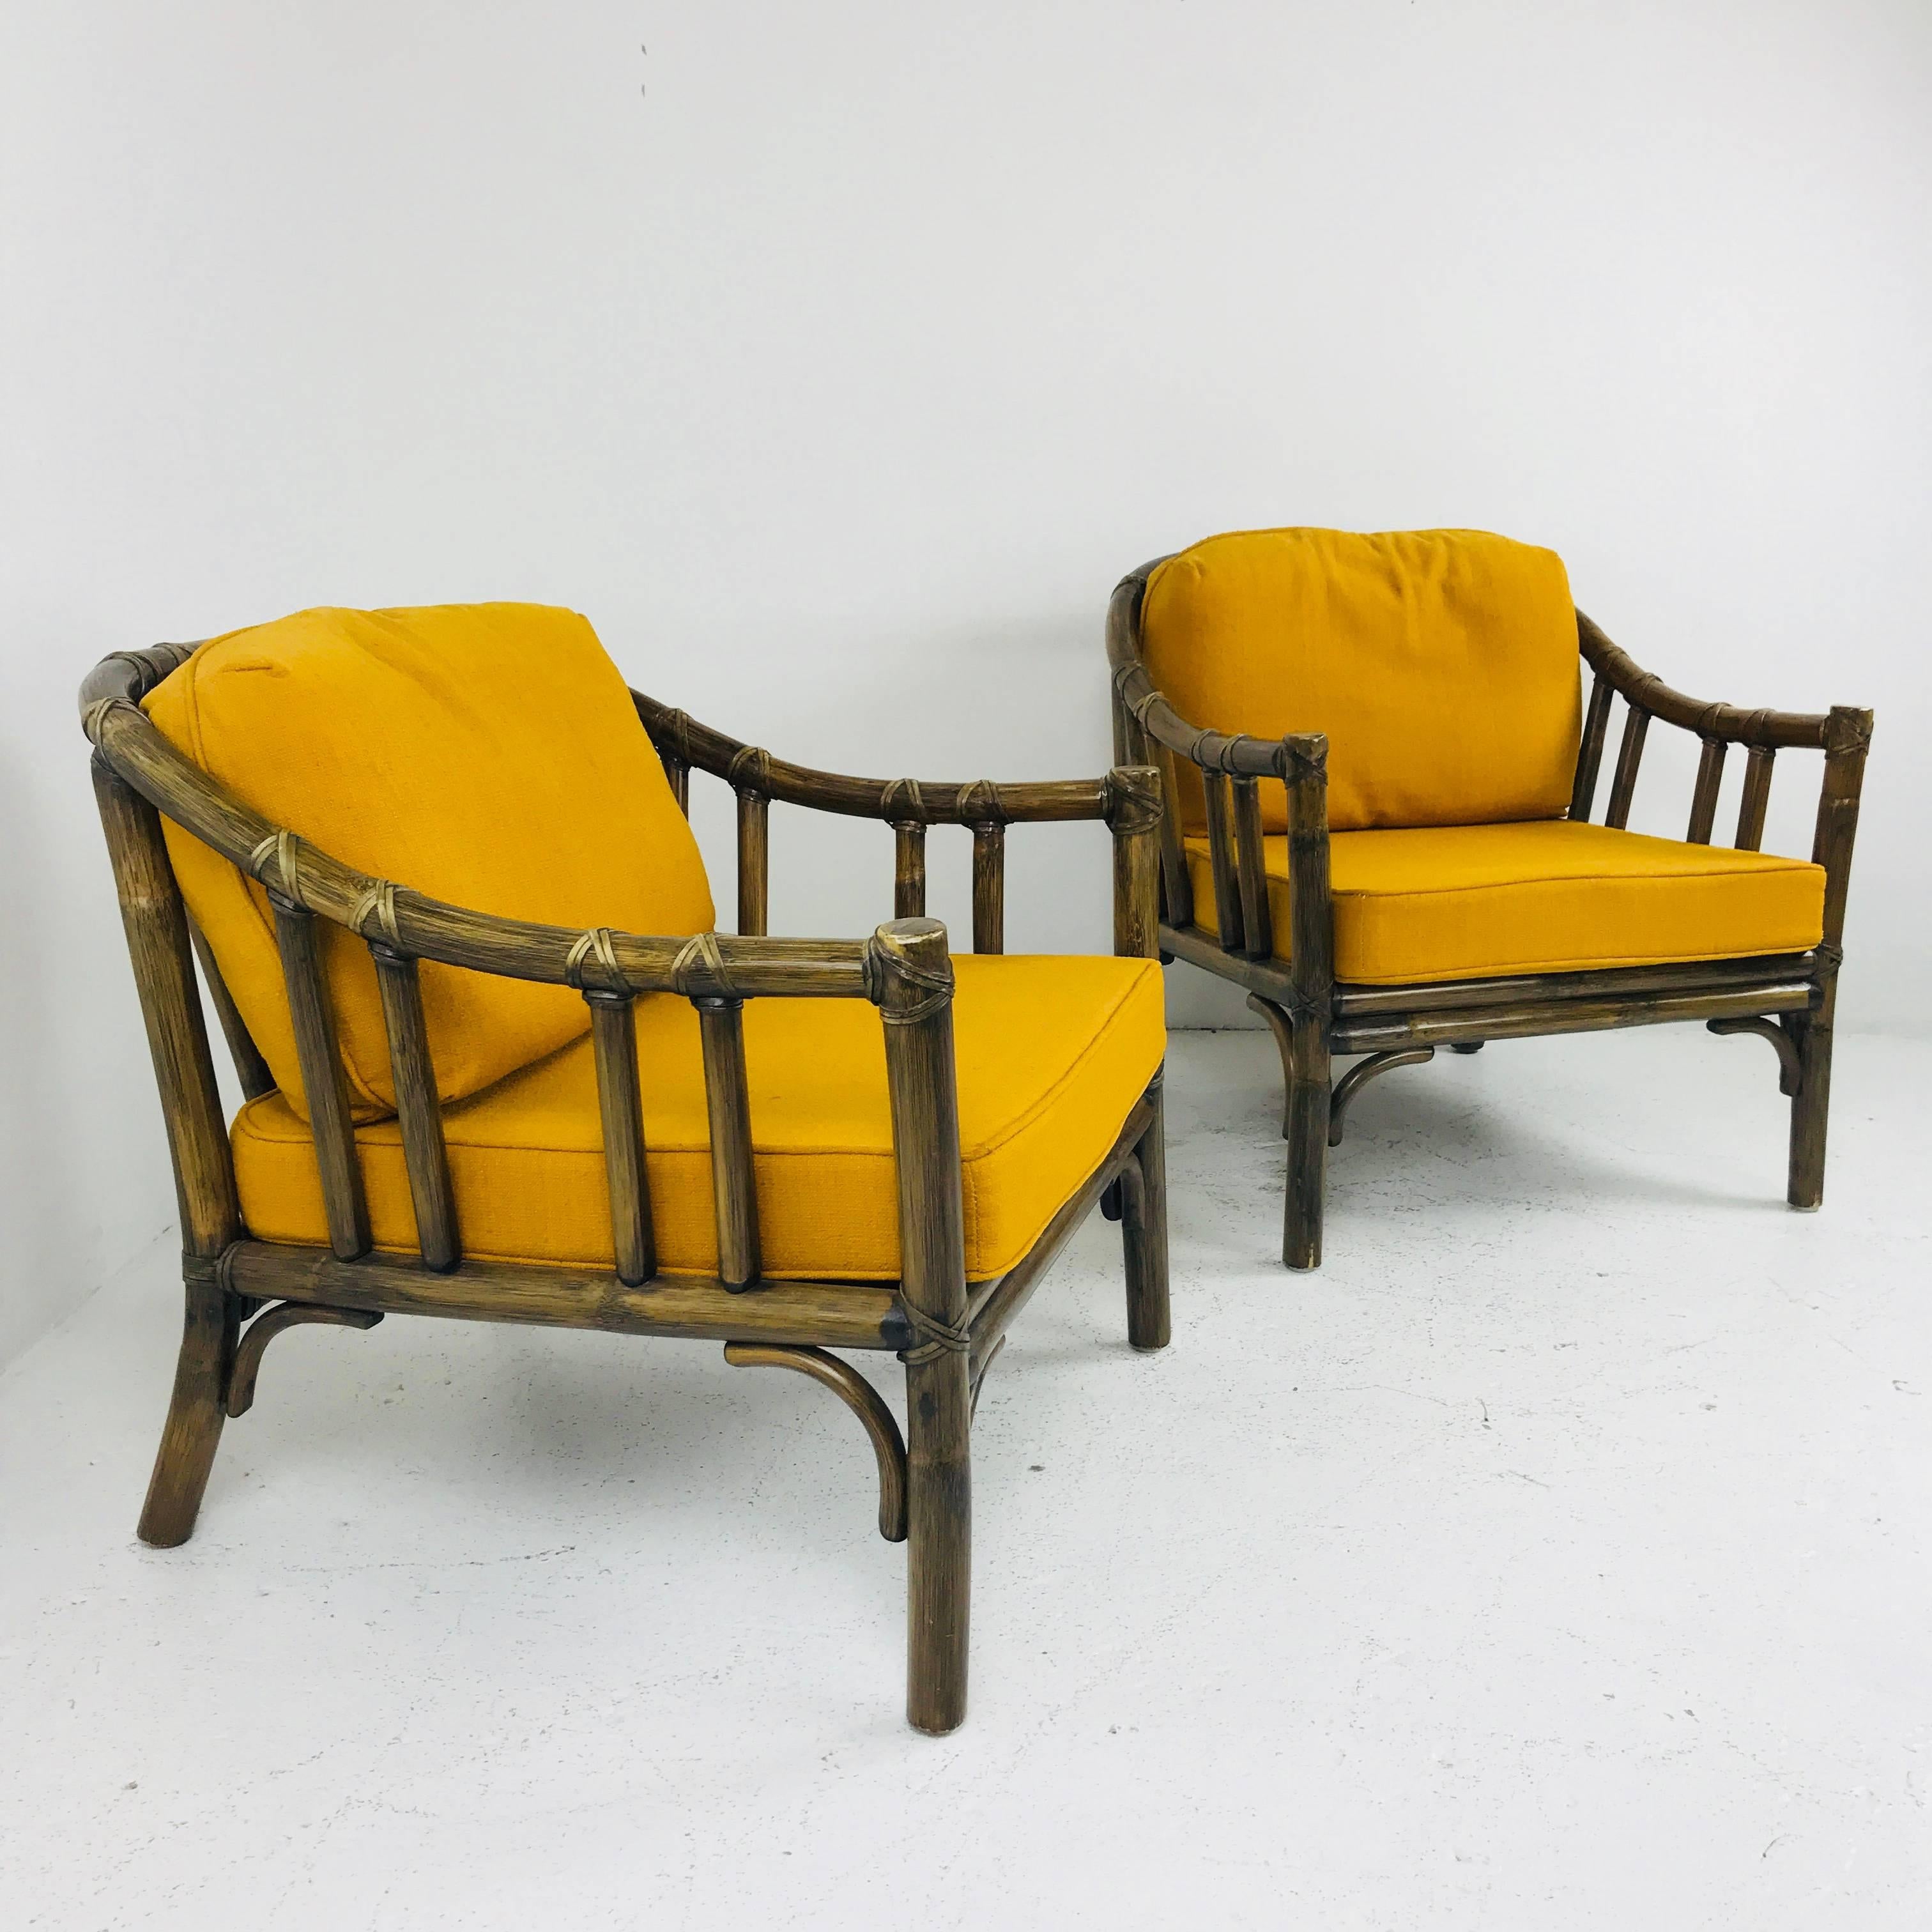 Pair of vintage McGuire lounge chairs. Chairs are in nice vintage condition with wear due to age and use. Chairs can be used as is but new finish and upholstery are recommended.

Dimensions: 28